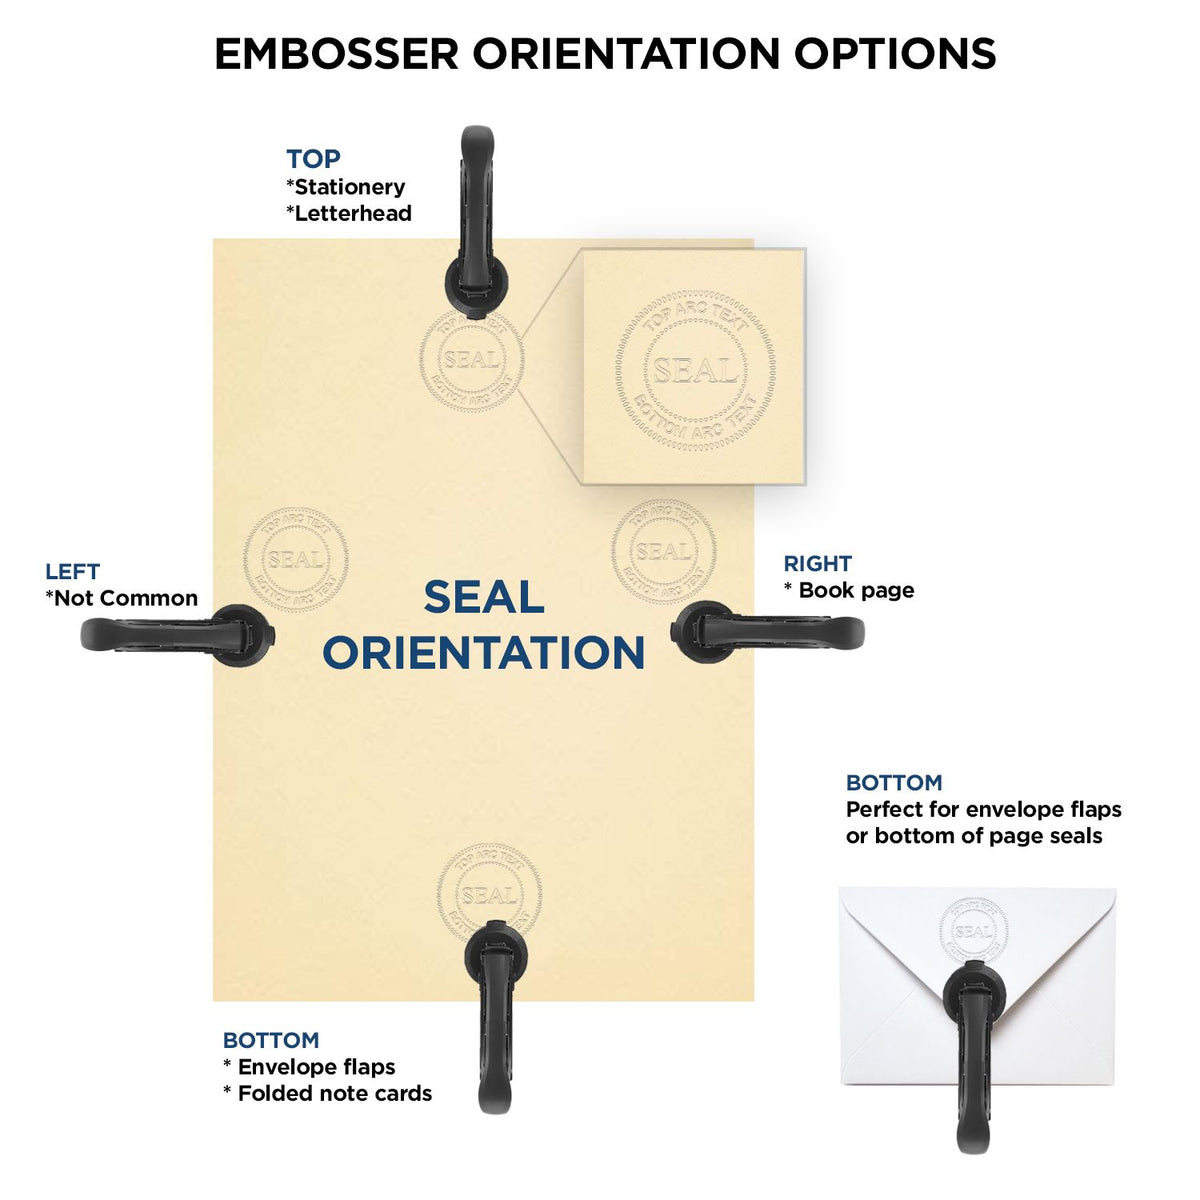 An infographic for the Heavy Duty Cast Iron Delaware Engineer Seal Embosser showing embosser orientation, this is showing examples of a top, bottom, right and left insert.